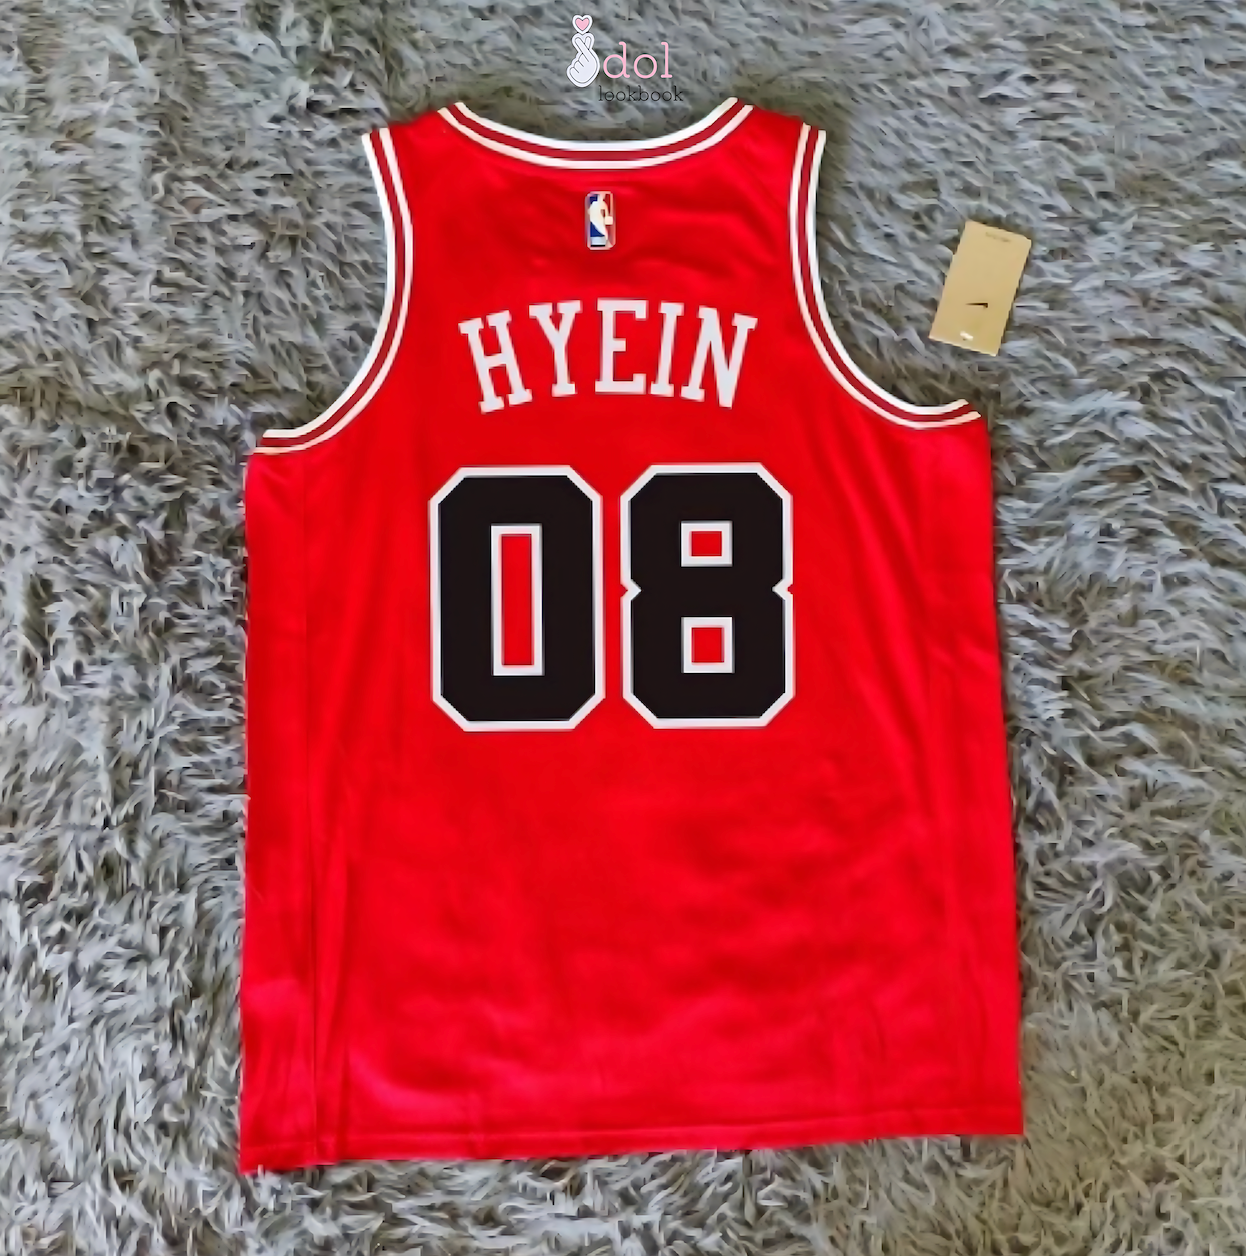 New Jeans Basketball Jersey // Red and Black